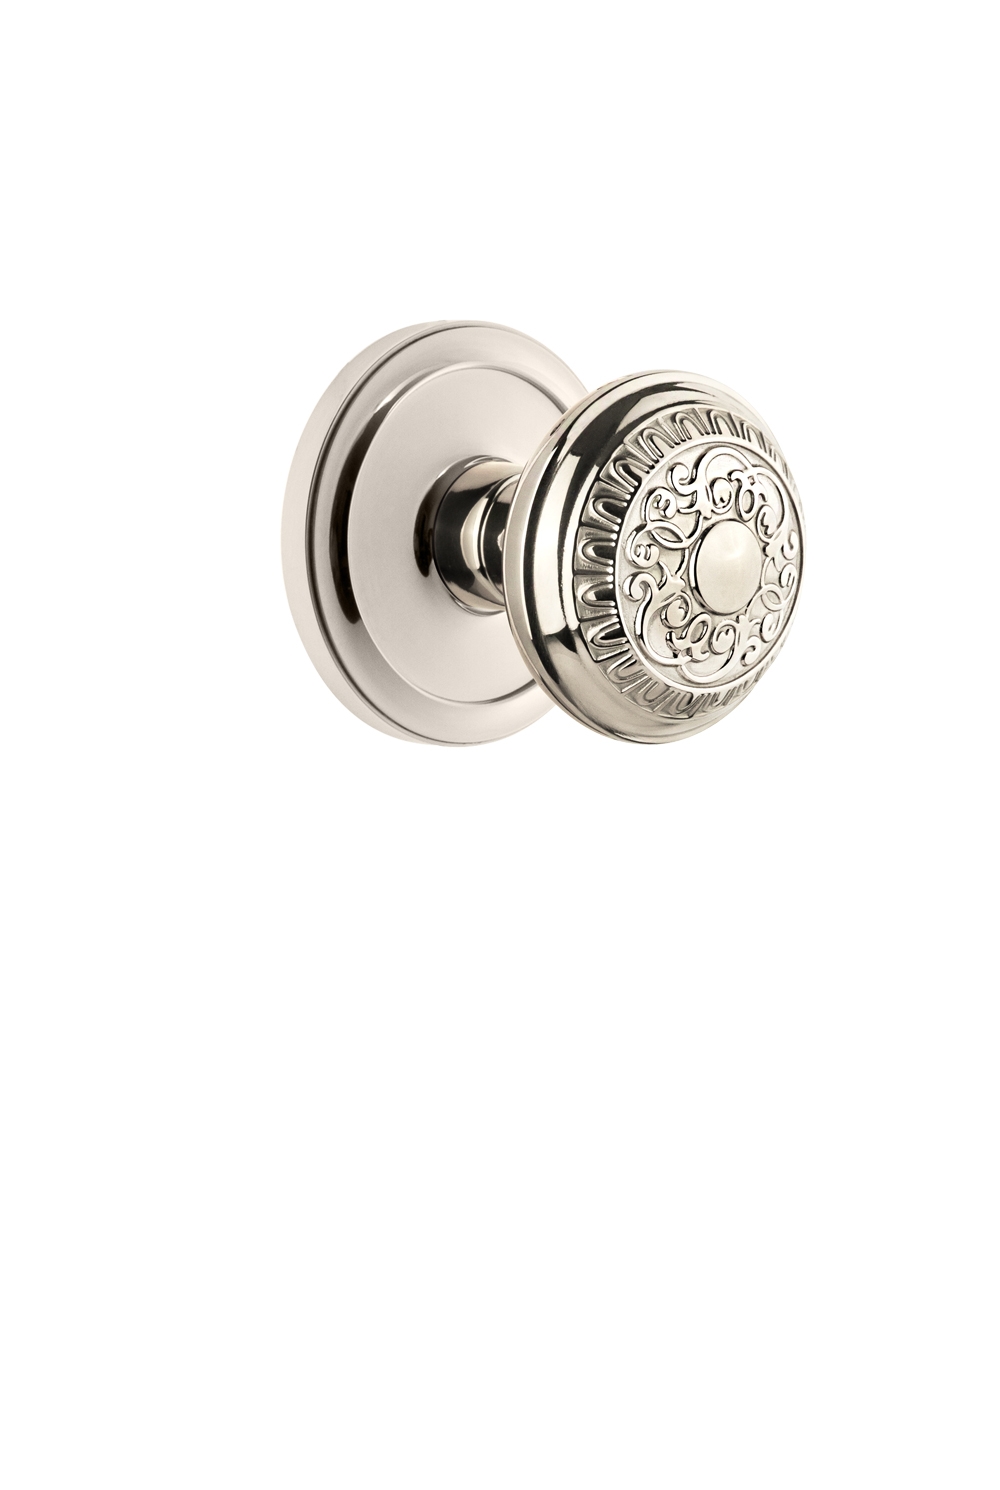 Grandeur Circulaire Rosette Double Dummy with Windsor Knob in Polished  Nickel - 810566